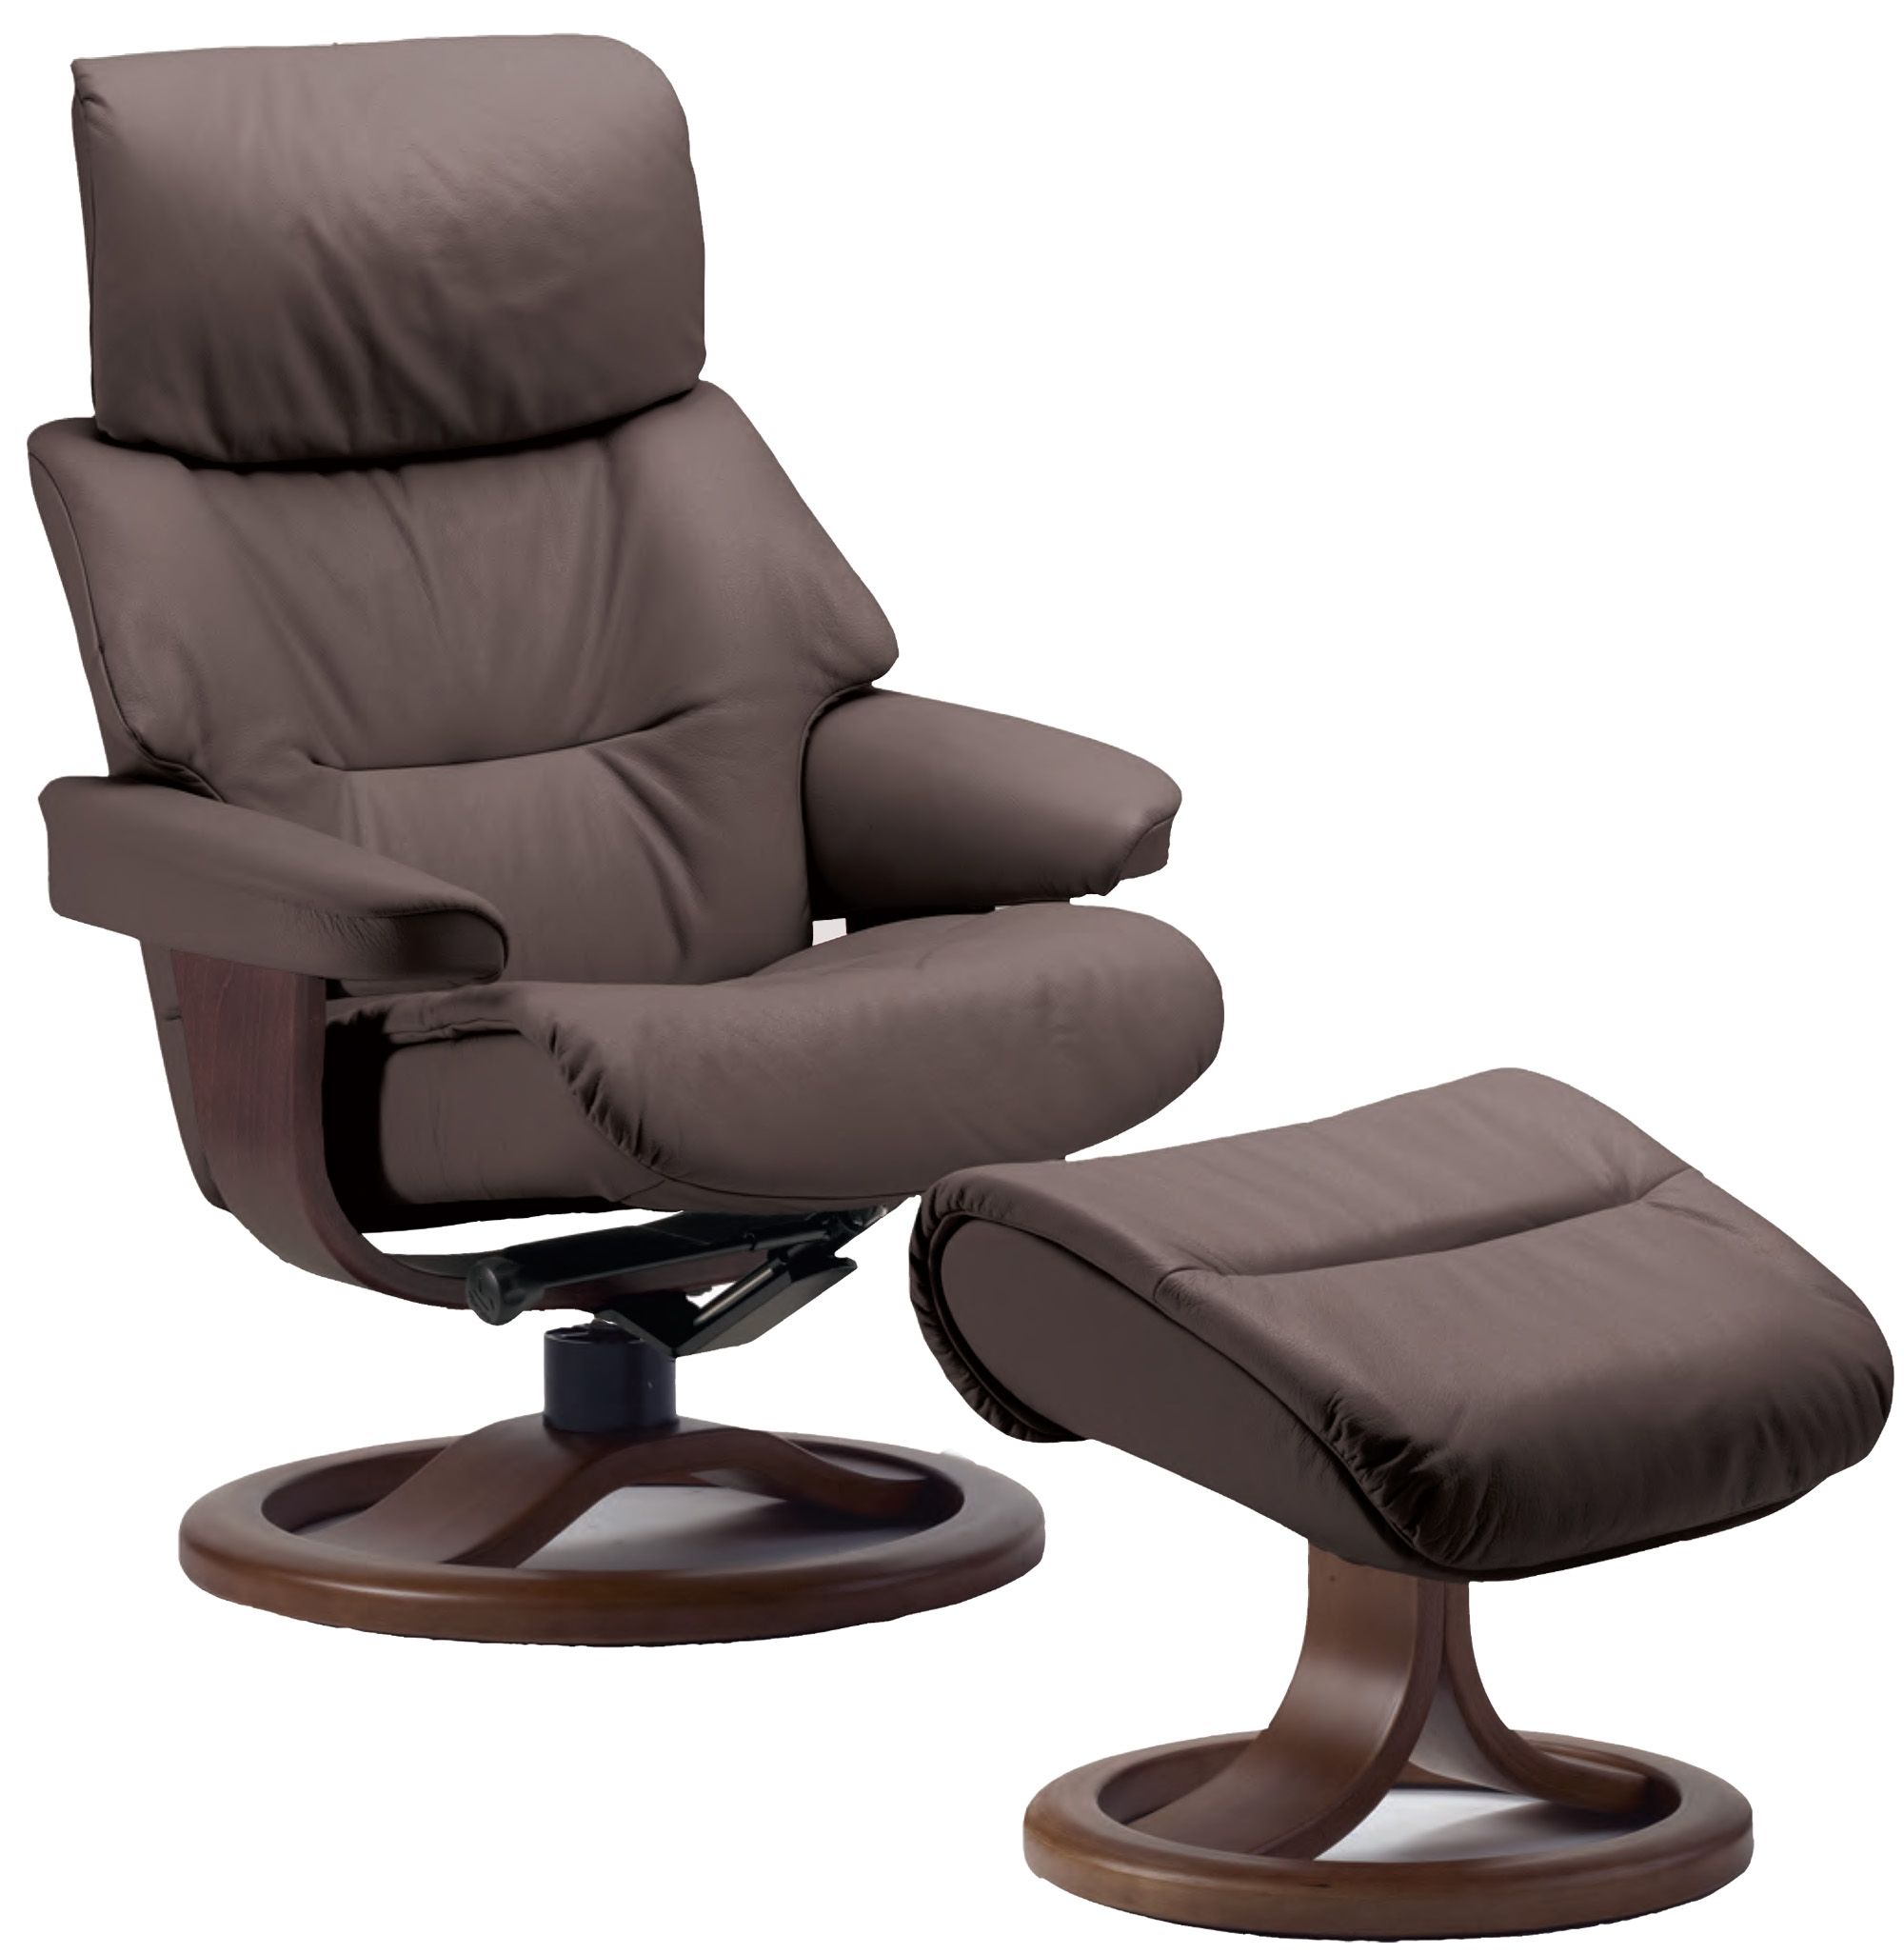 Fjords Ergonomic Leather Recliner Chair Ottoman Scandinavian Within Ergonomic Sofas And Chairs (Photo 16376 of 35622)